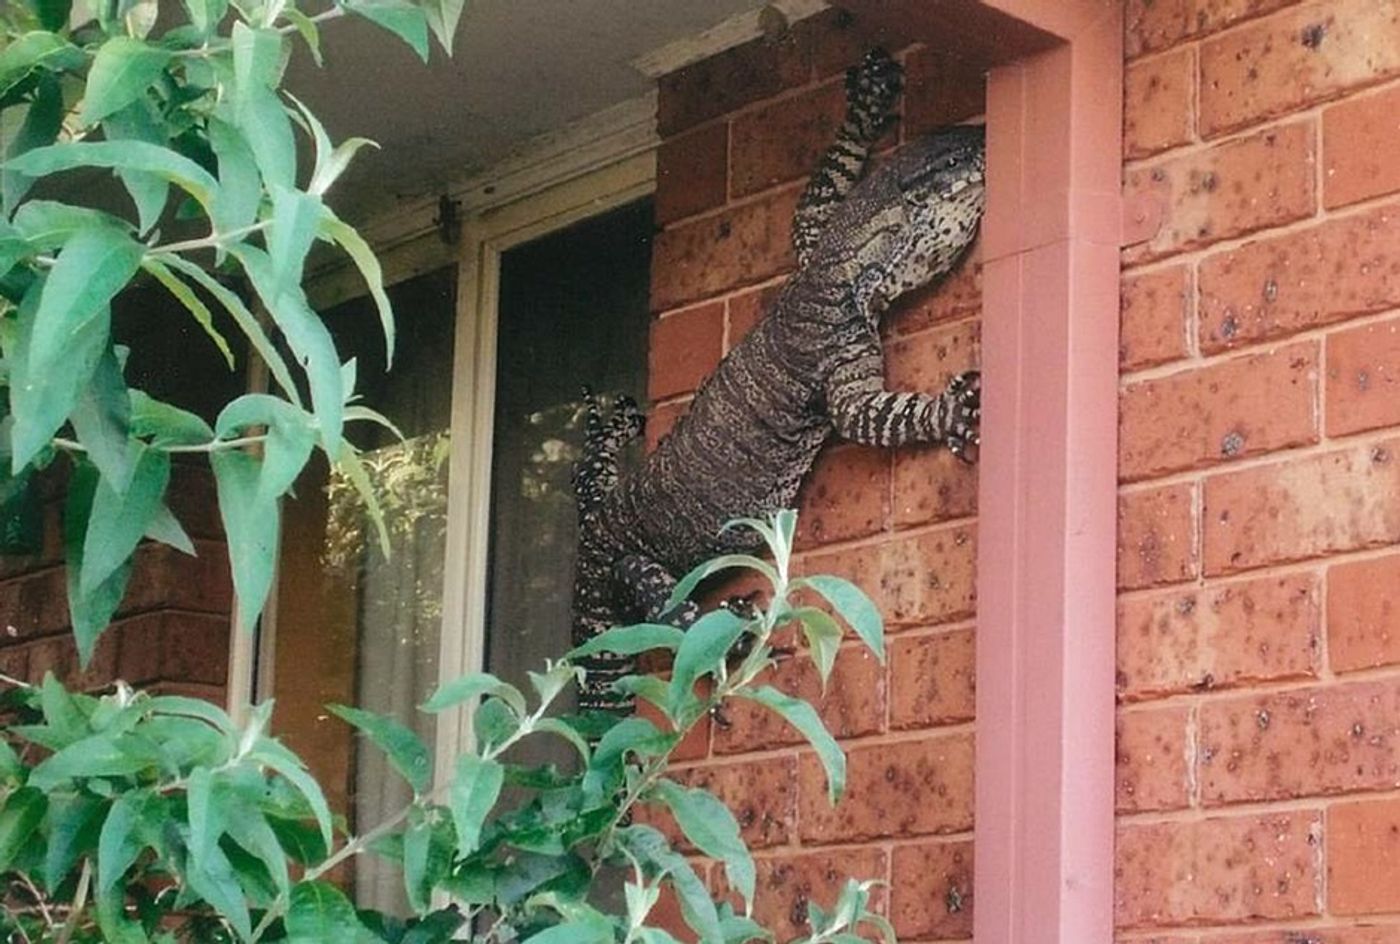 A 1.5-meter goanna lizard that was found on the front of a man's house.